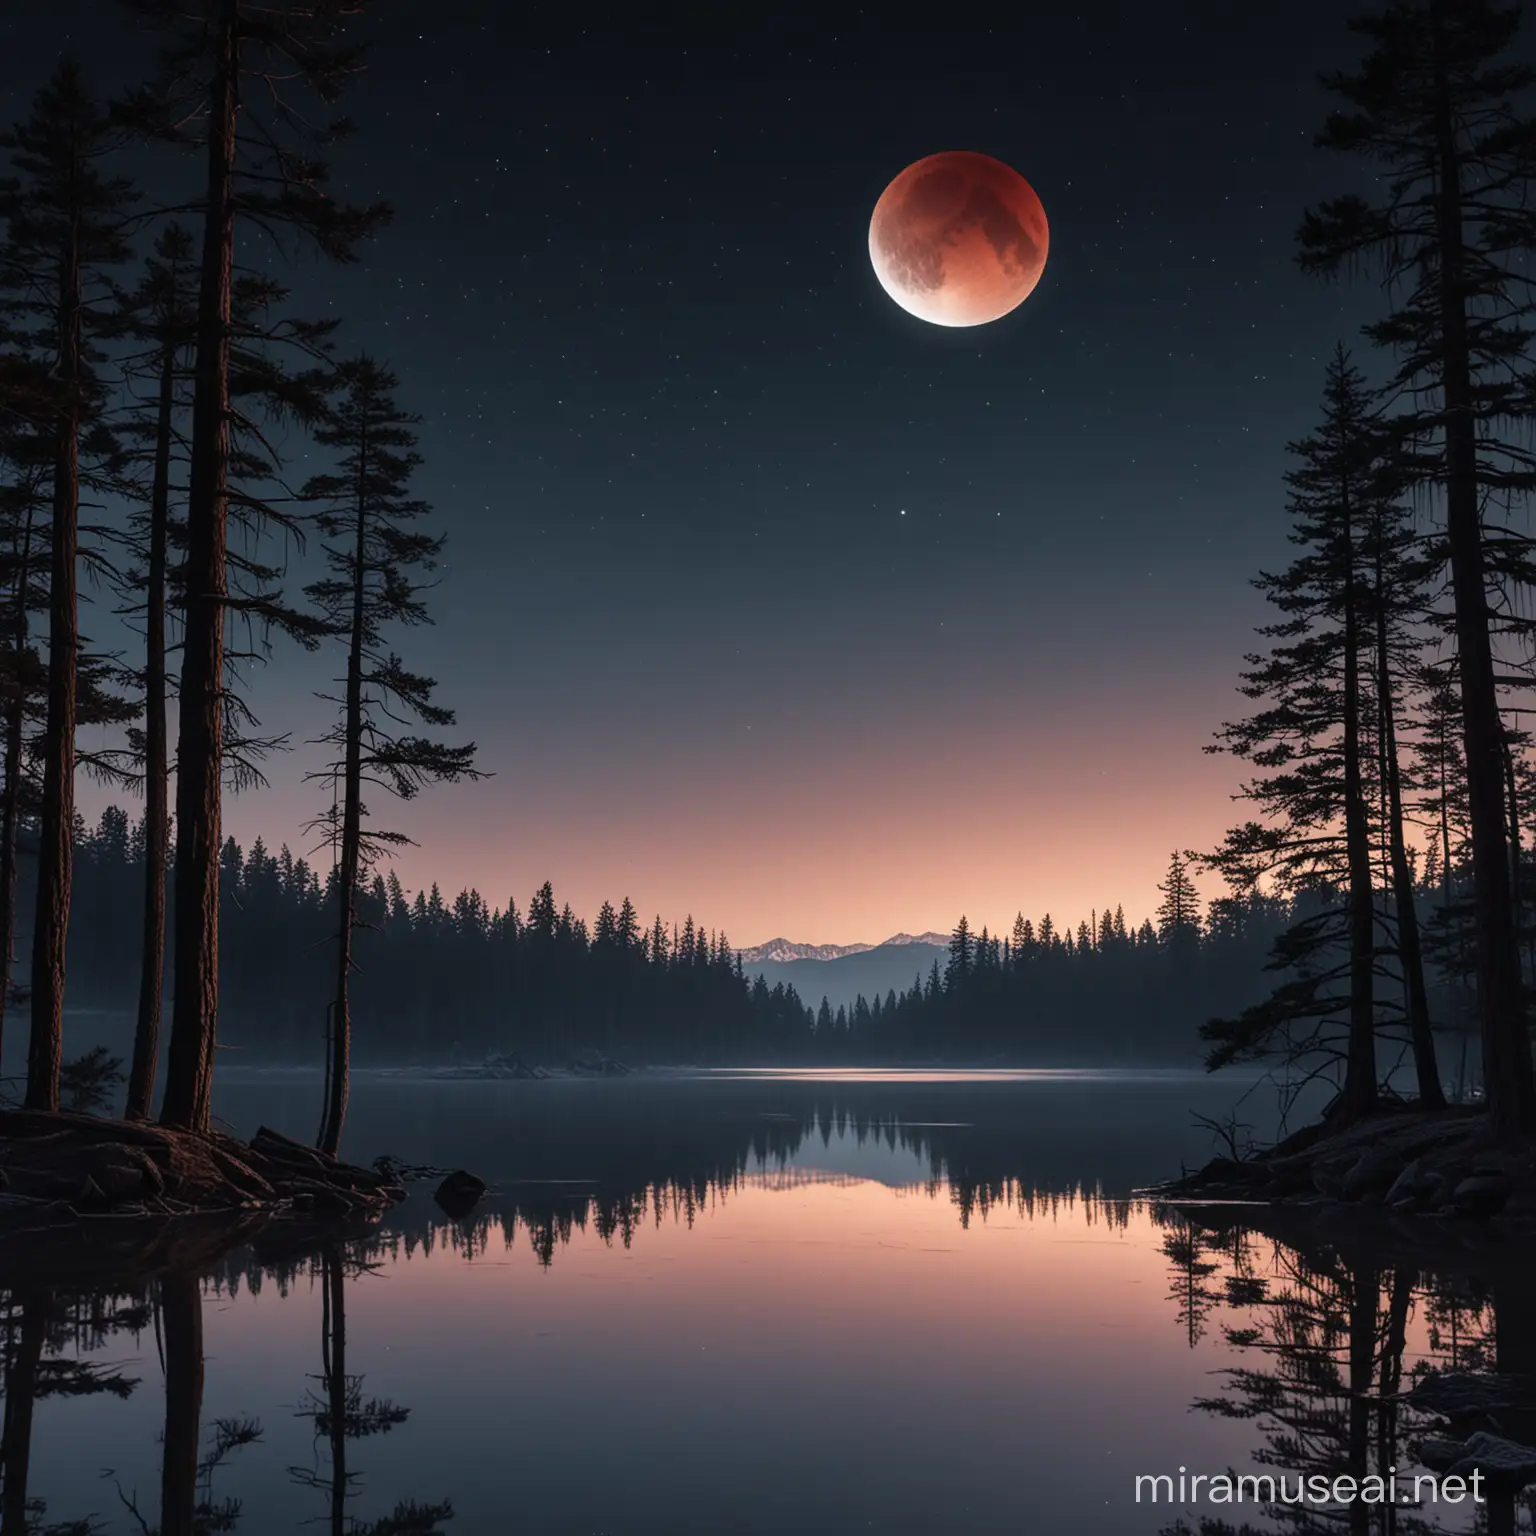 Lunar Eclipse Over a Serene Lake with Pine Trees